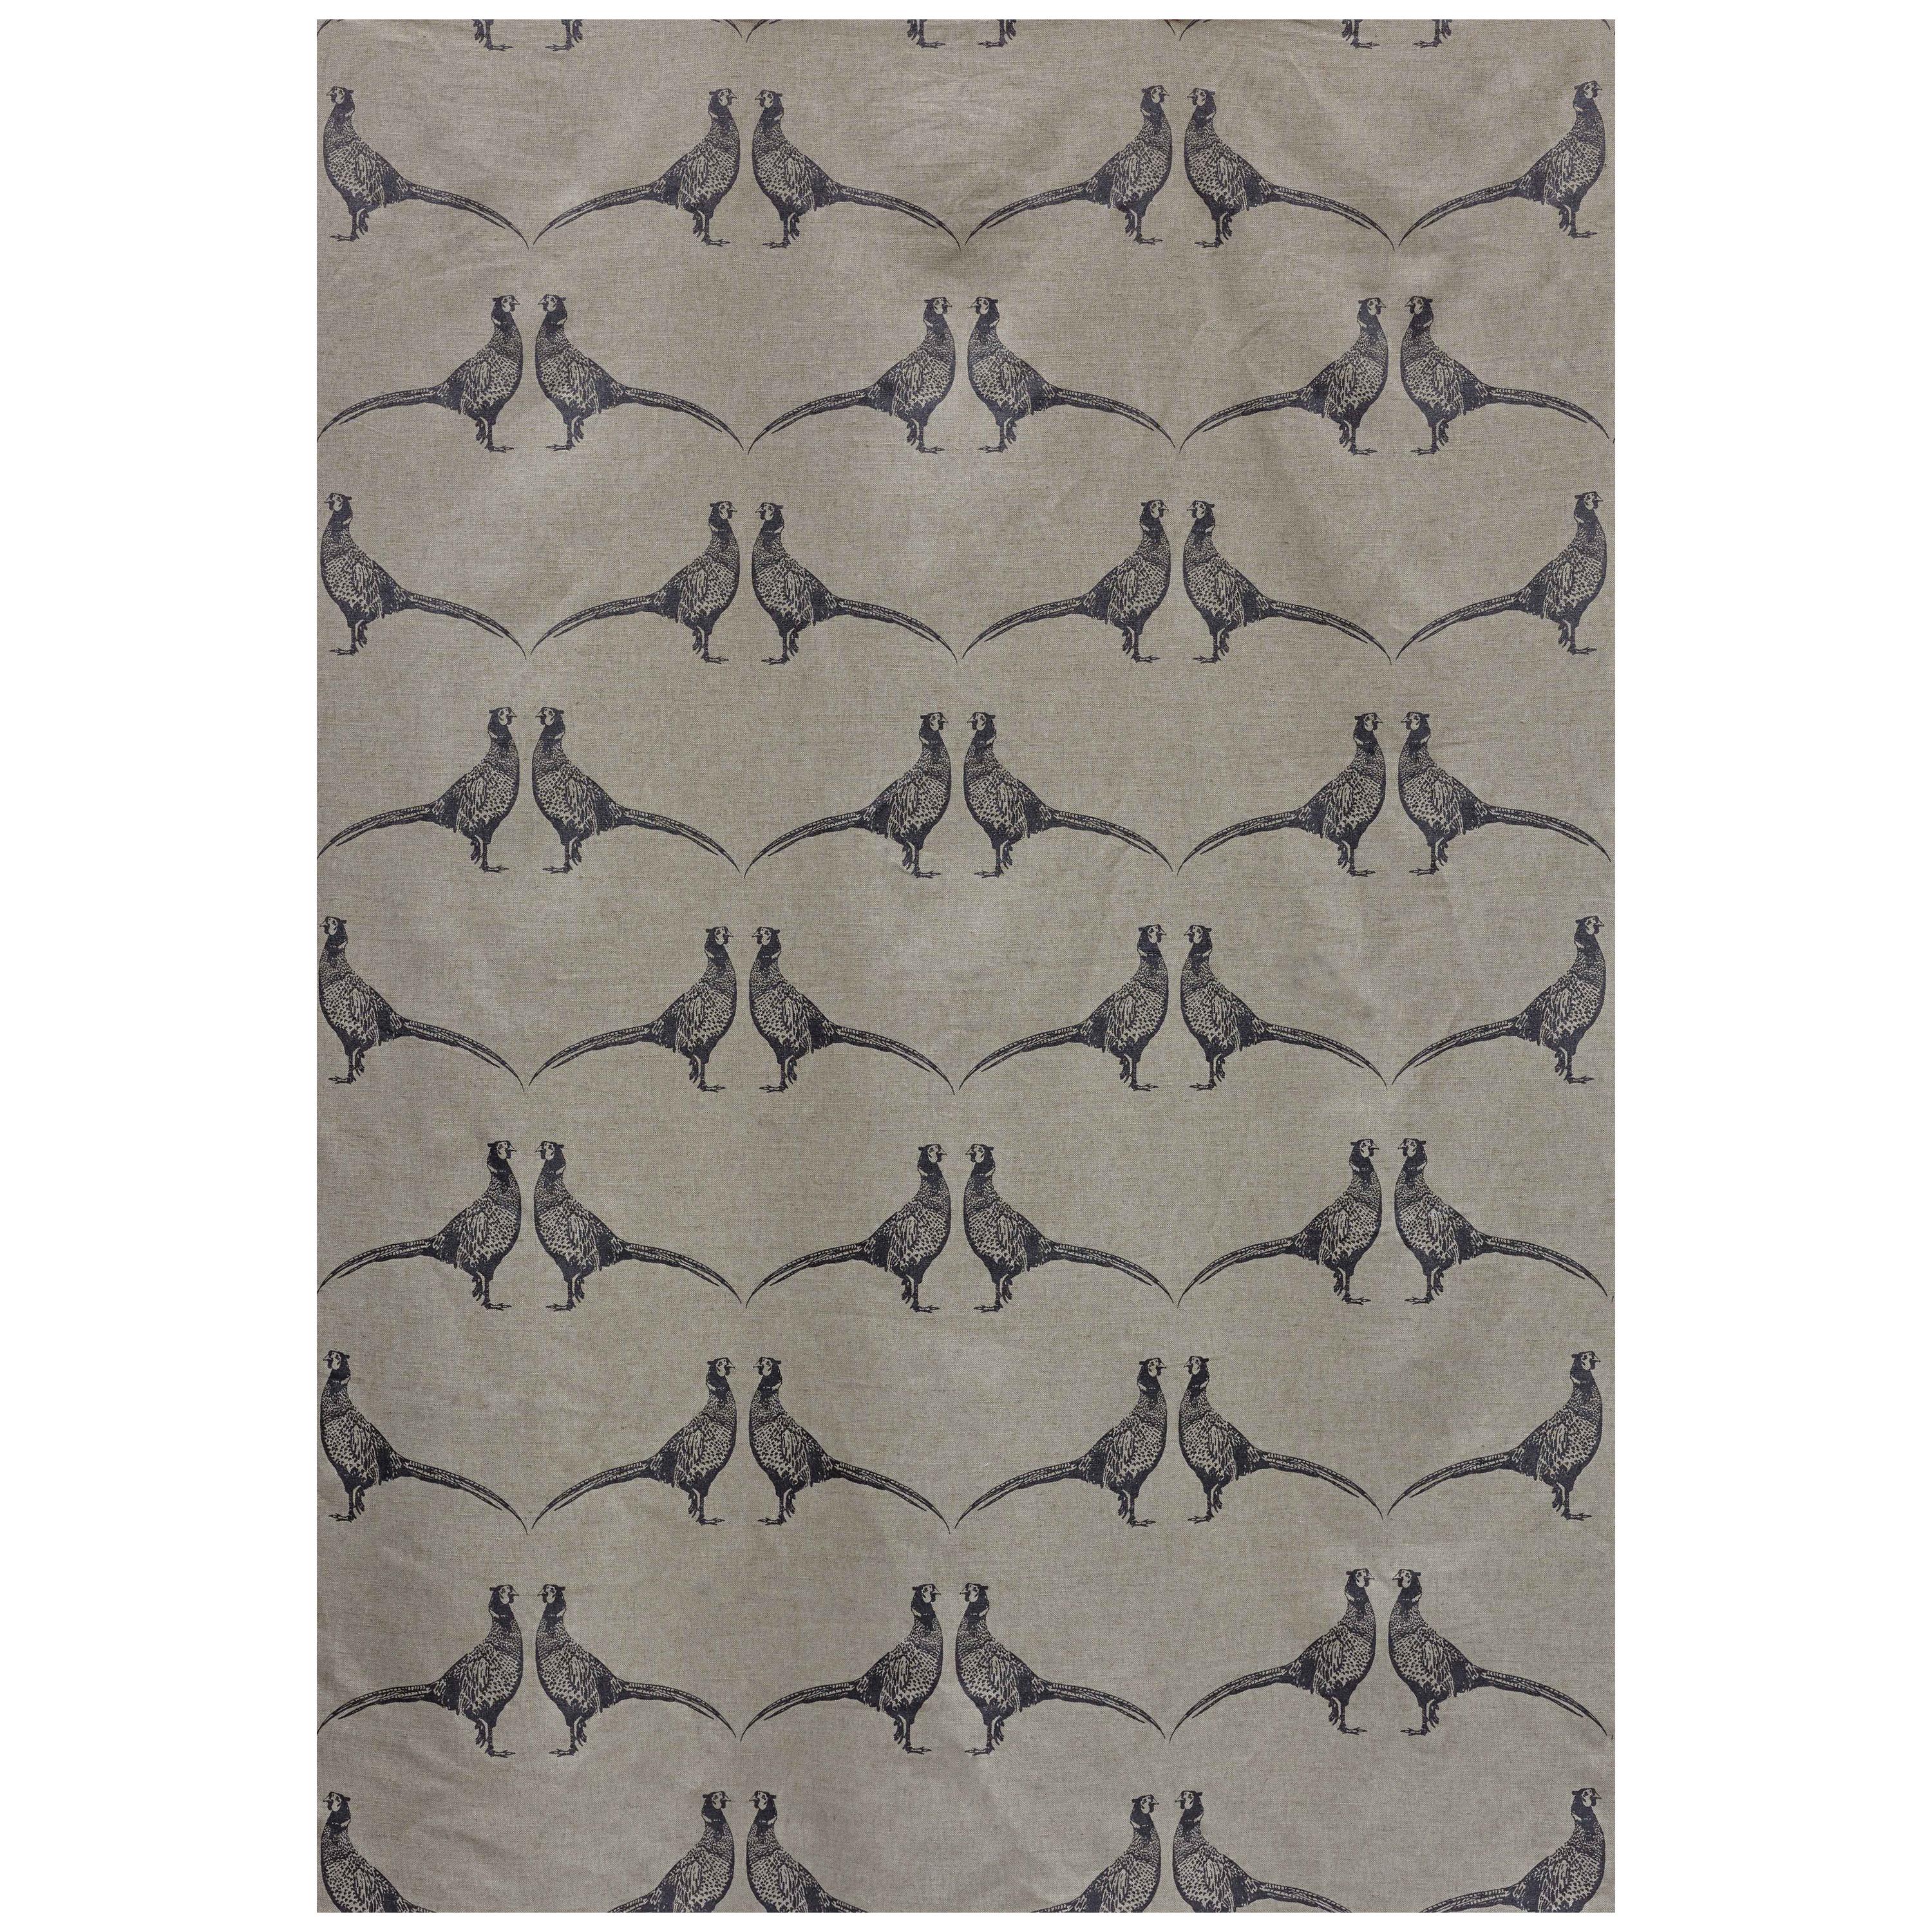 'Pheasant' Contemporary, Traditional Fabric in Charcoal on Natural For Sale